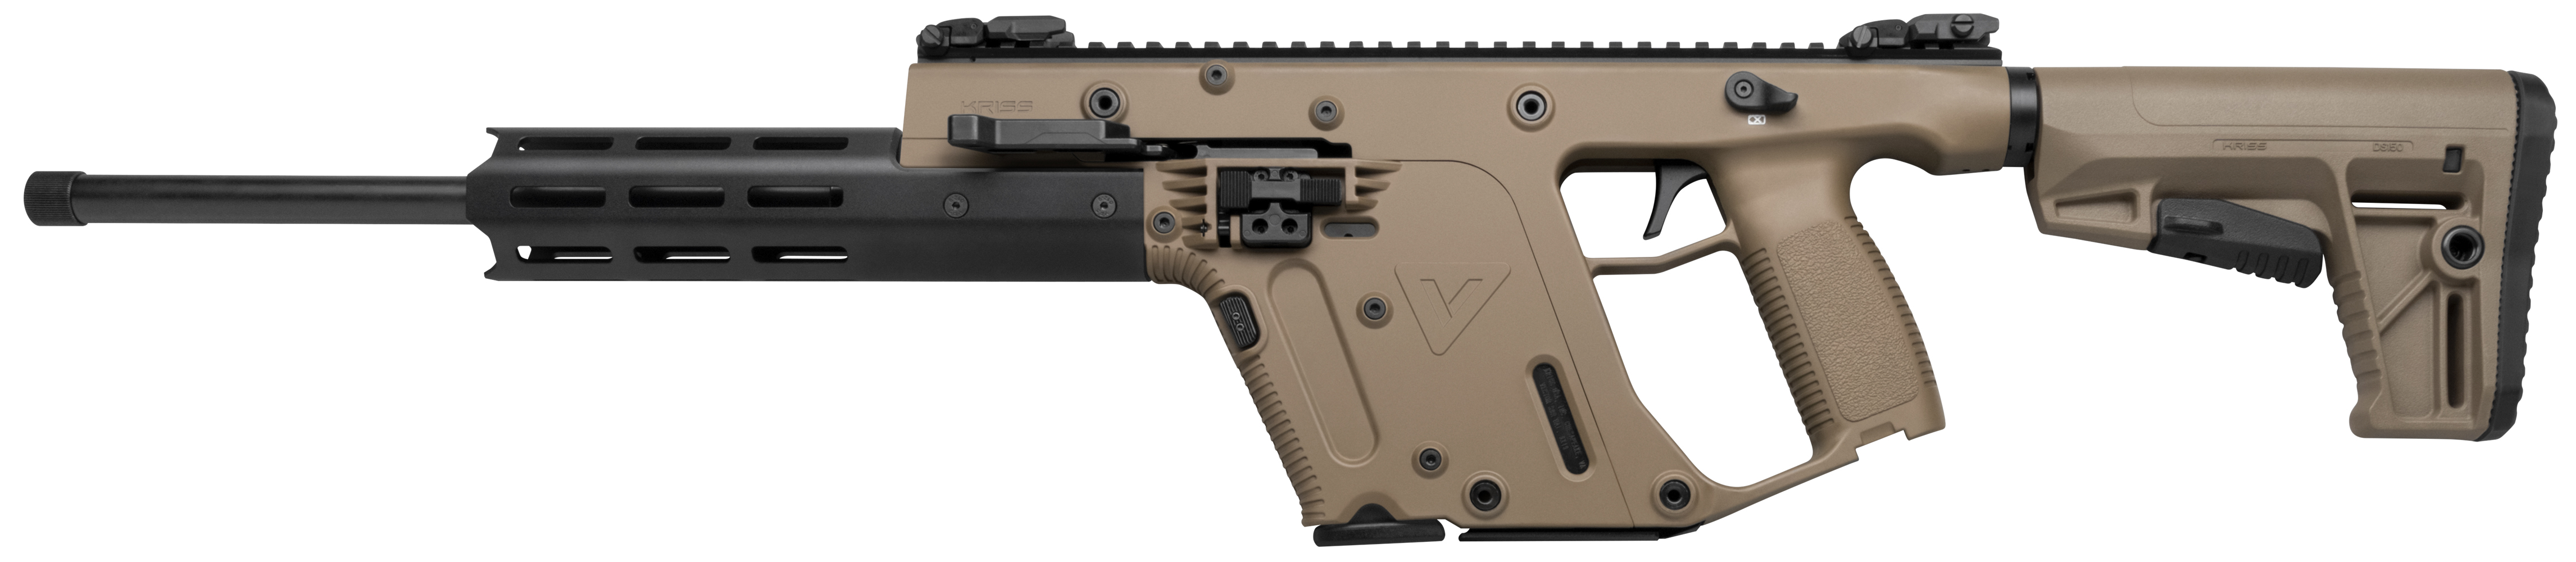 KRISS VECTOR CRB G2 22LR 16" FXD STOCK 10RD FDE